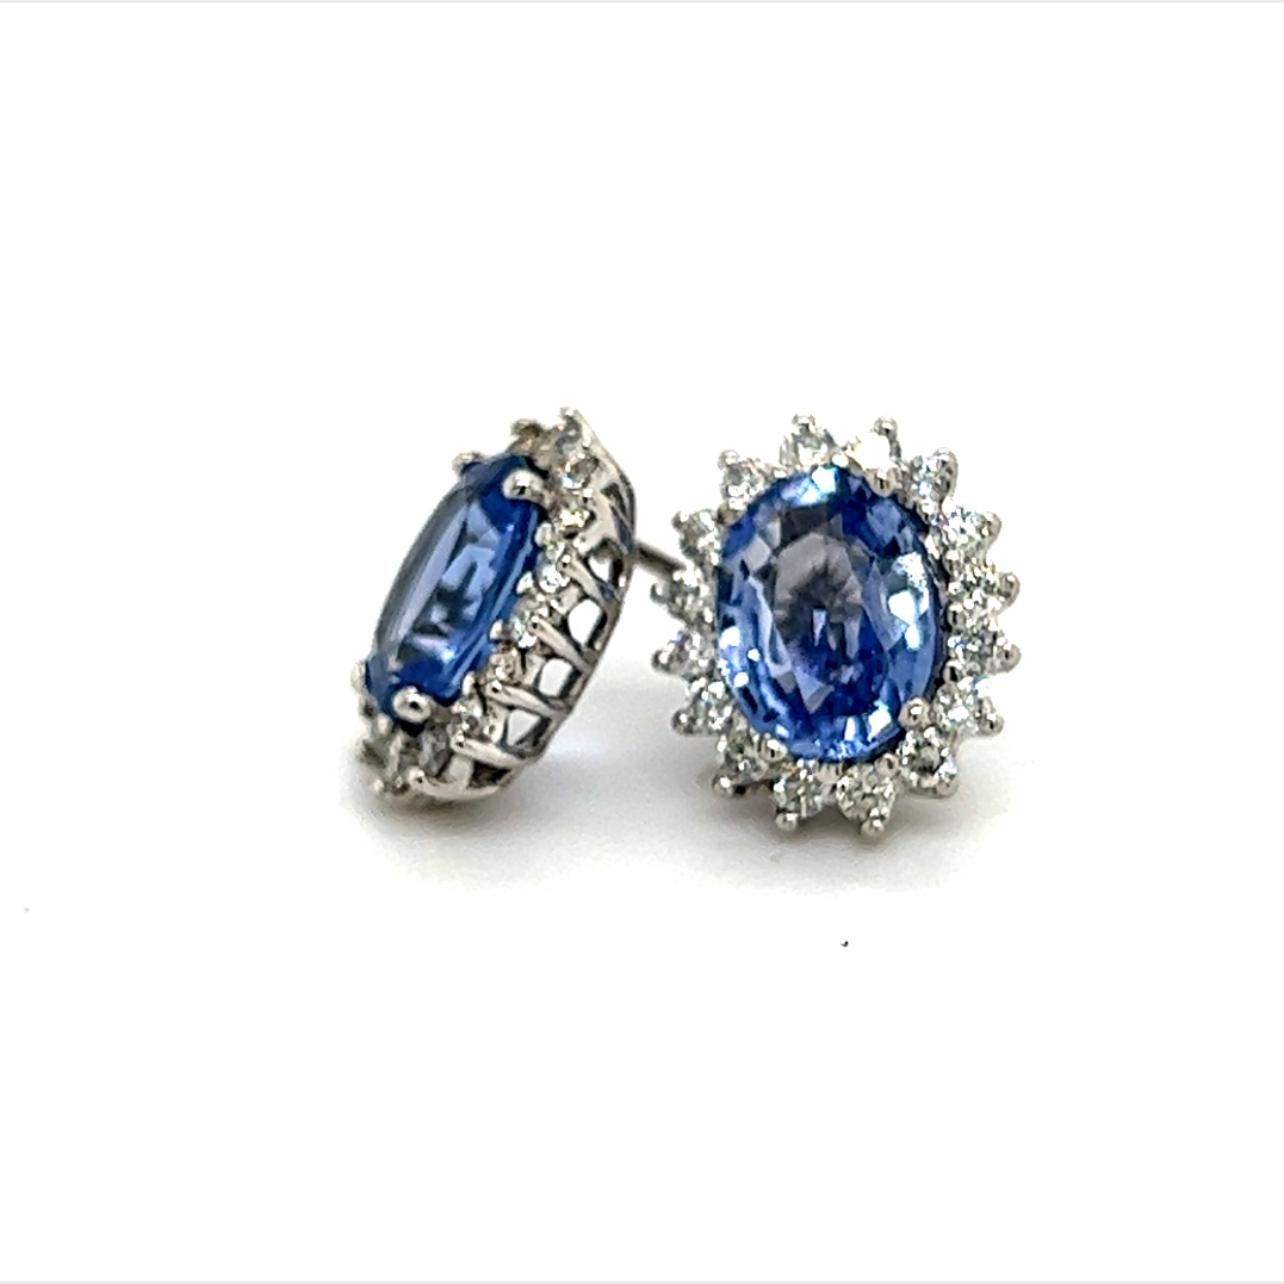 Natural Sapphire Diamond Earrings 14k Gold 3.2 TCW Certified For Sale 5